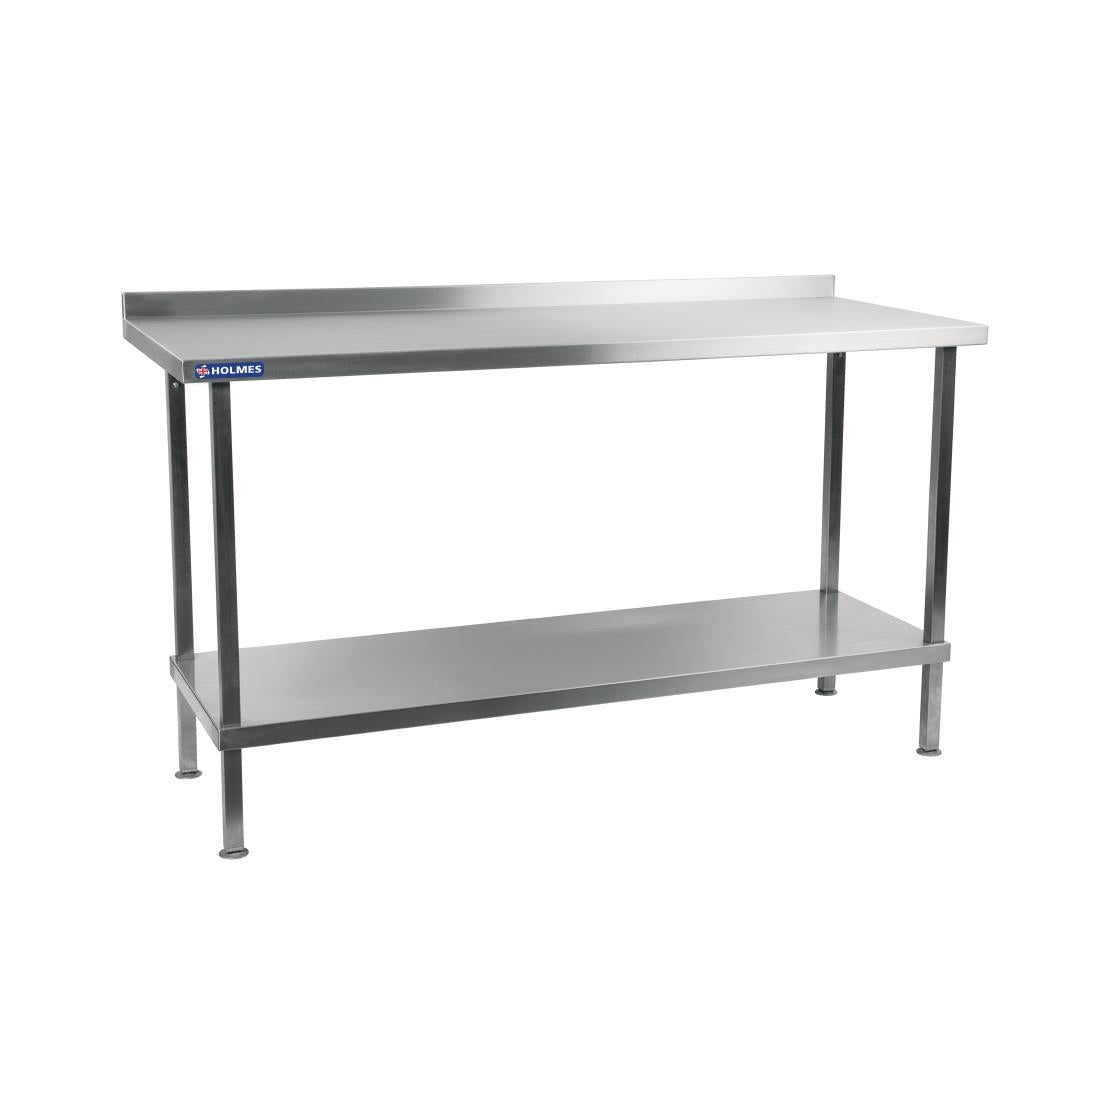 DR038 Holmes Stainless Steel Wall Table 1800mm JD Catering Equipment Solutions Ltd